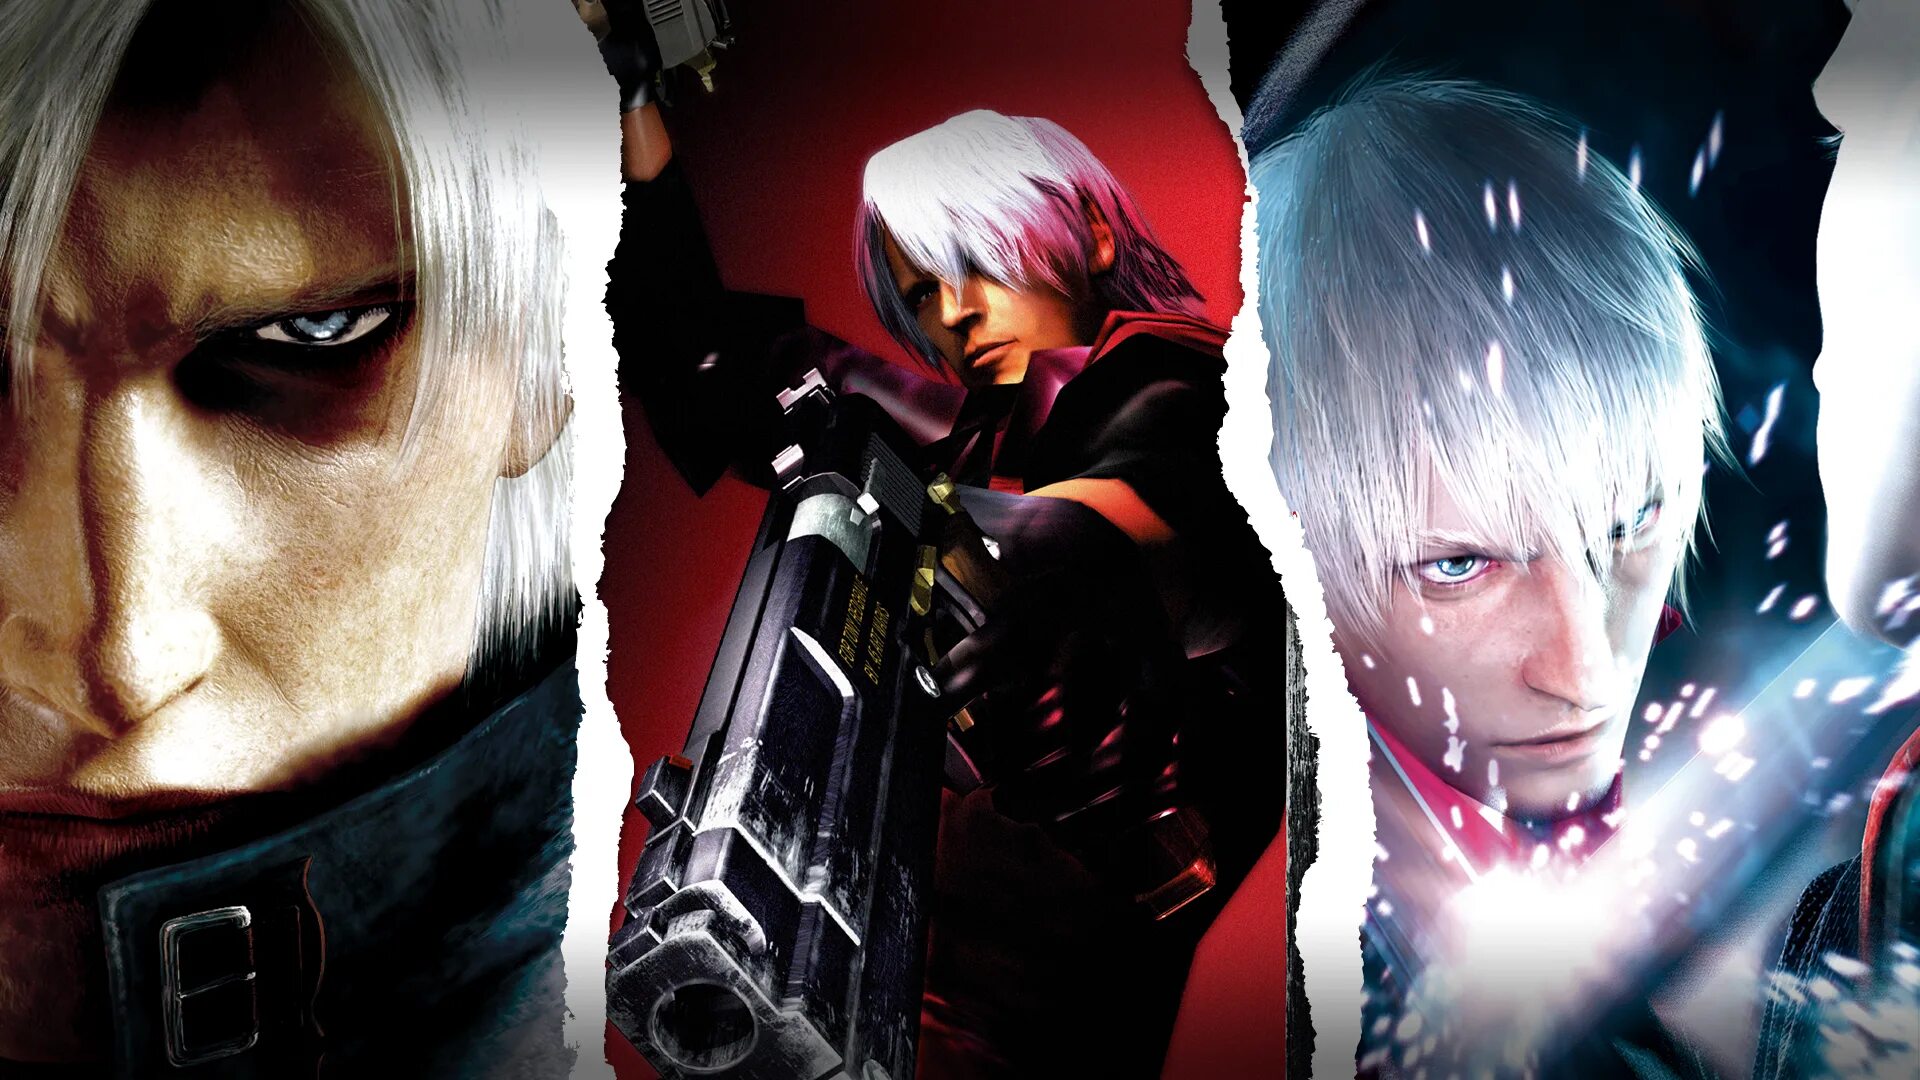 Devil may cry collection купить. Devil May Cry 1. Devil May Cry 5. Devil May Cry 1-3. Данте Devil May Cry 2.